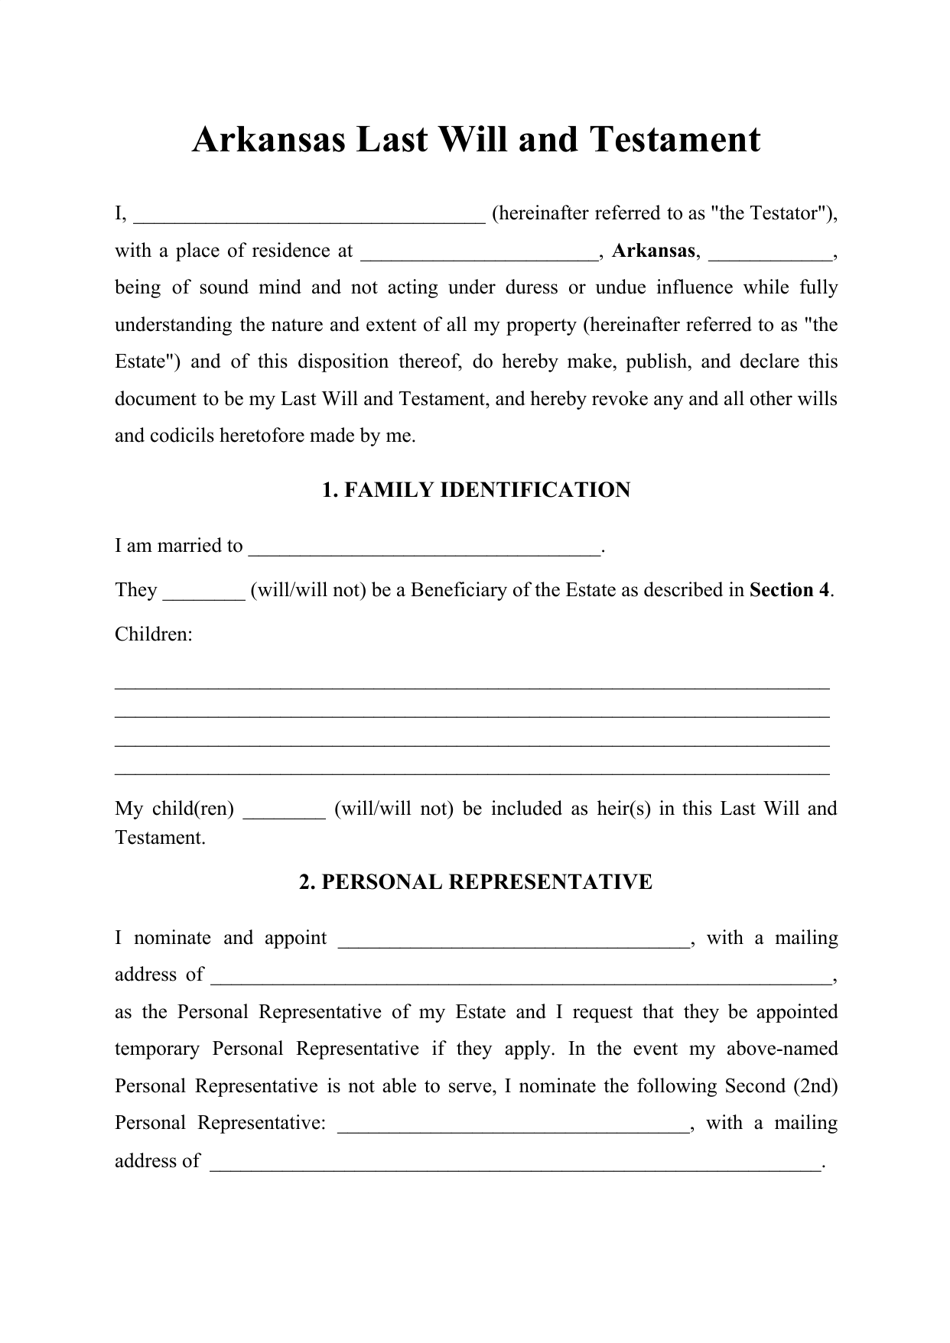 Last Will and Testament Template - Arkansas Document Preview